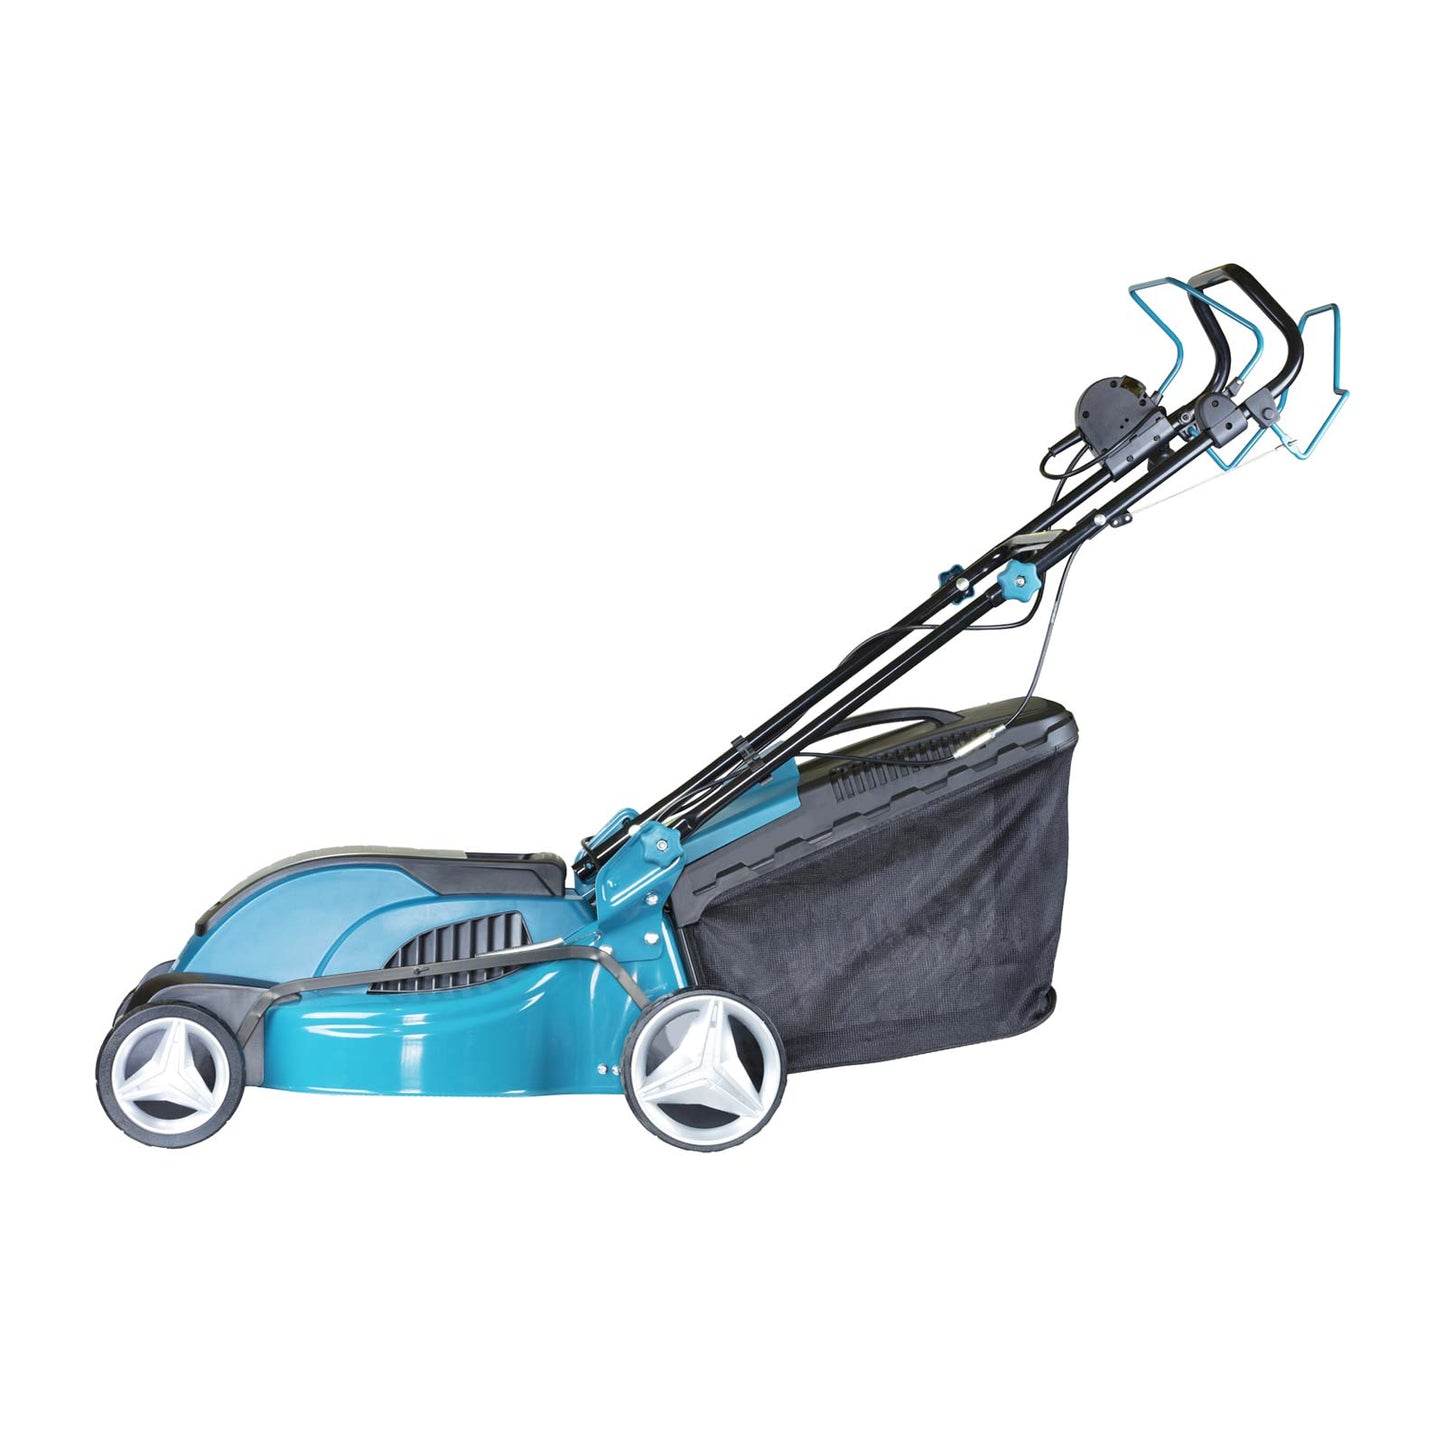 Offer For 3 in 1 Walk Behind Scarifier Lawn Dethatcher and Rake Wired Electric 120V 12A with Collection Bag for Yard Gardening Landscaping MowerShop